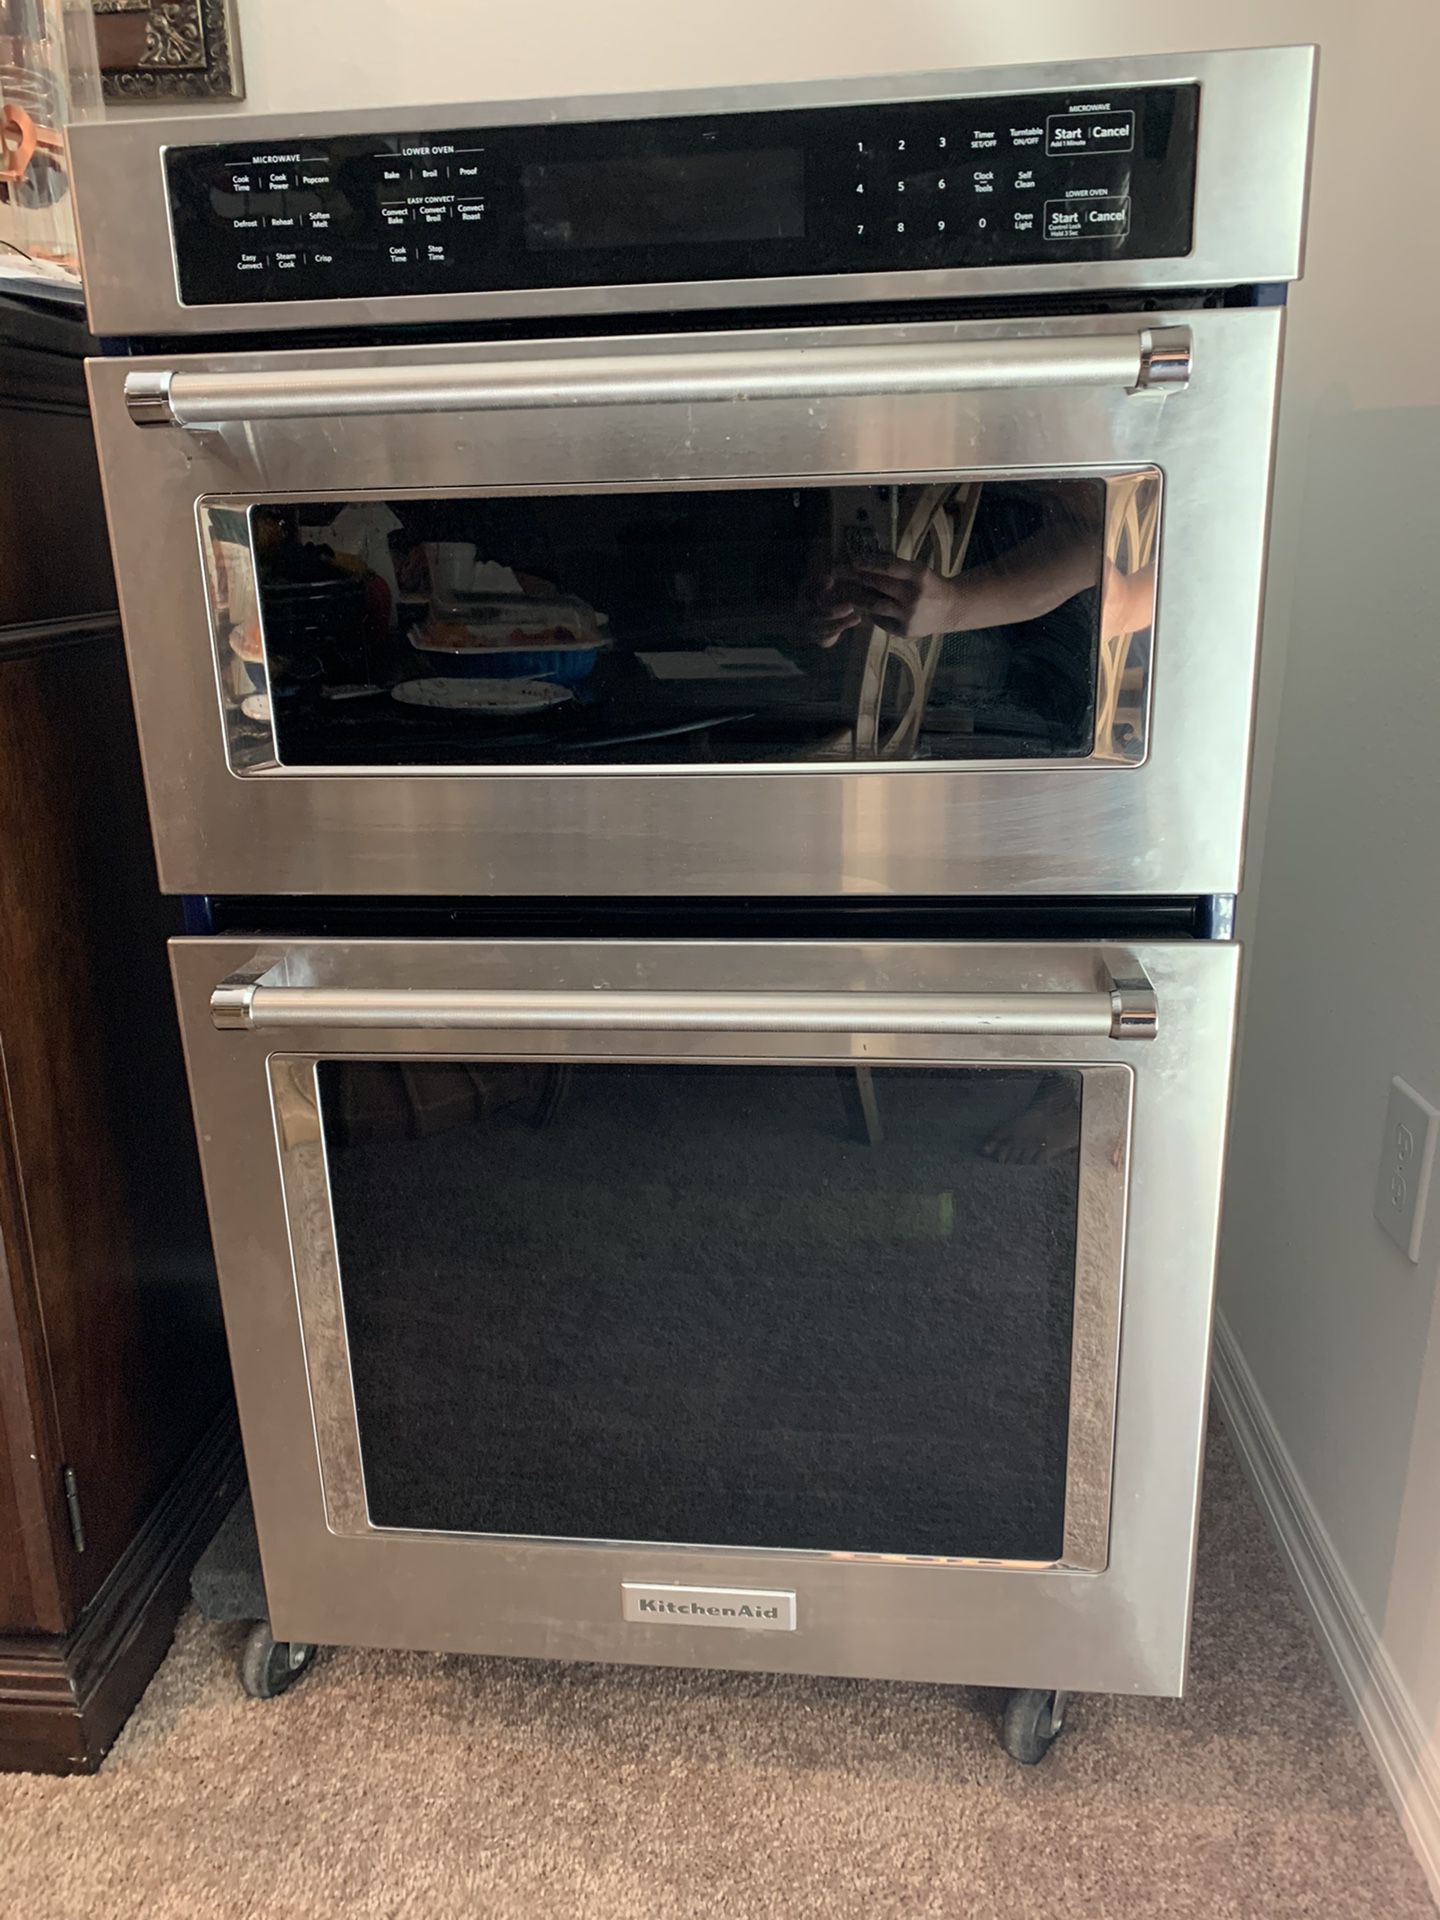 Kitchen Aid wall Confection oven and microwave